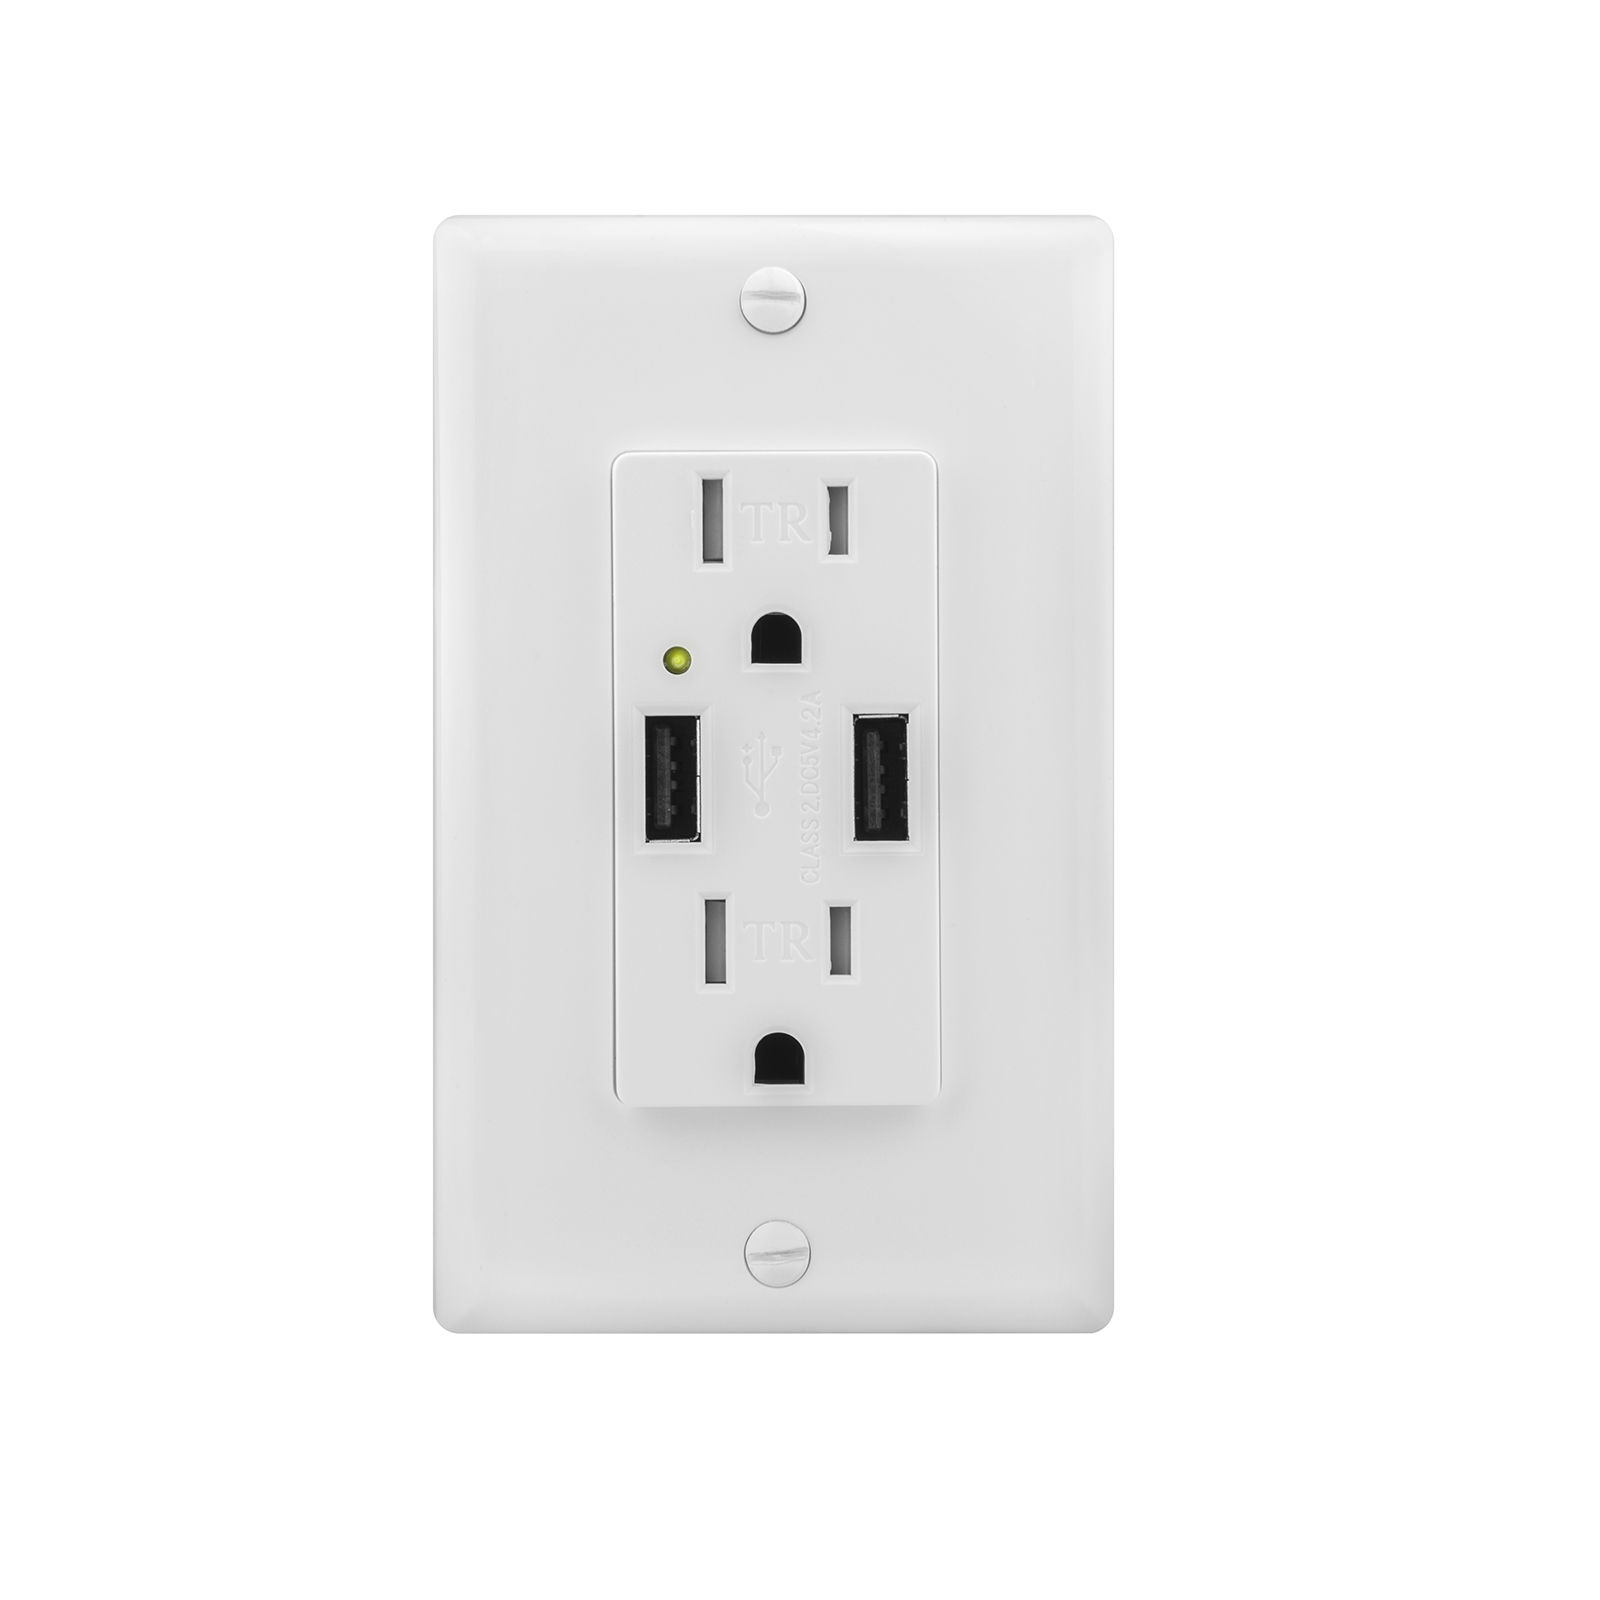 2-Port Rapid Charging USB Wall Outlet—$10.99 Shipped!